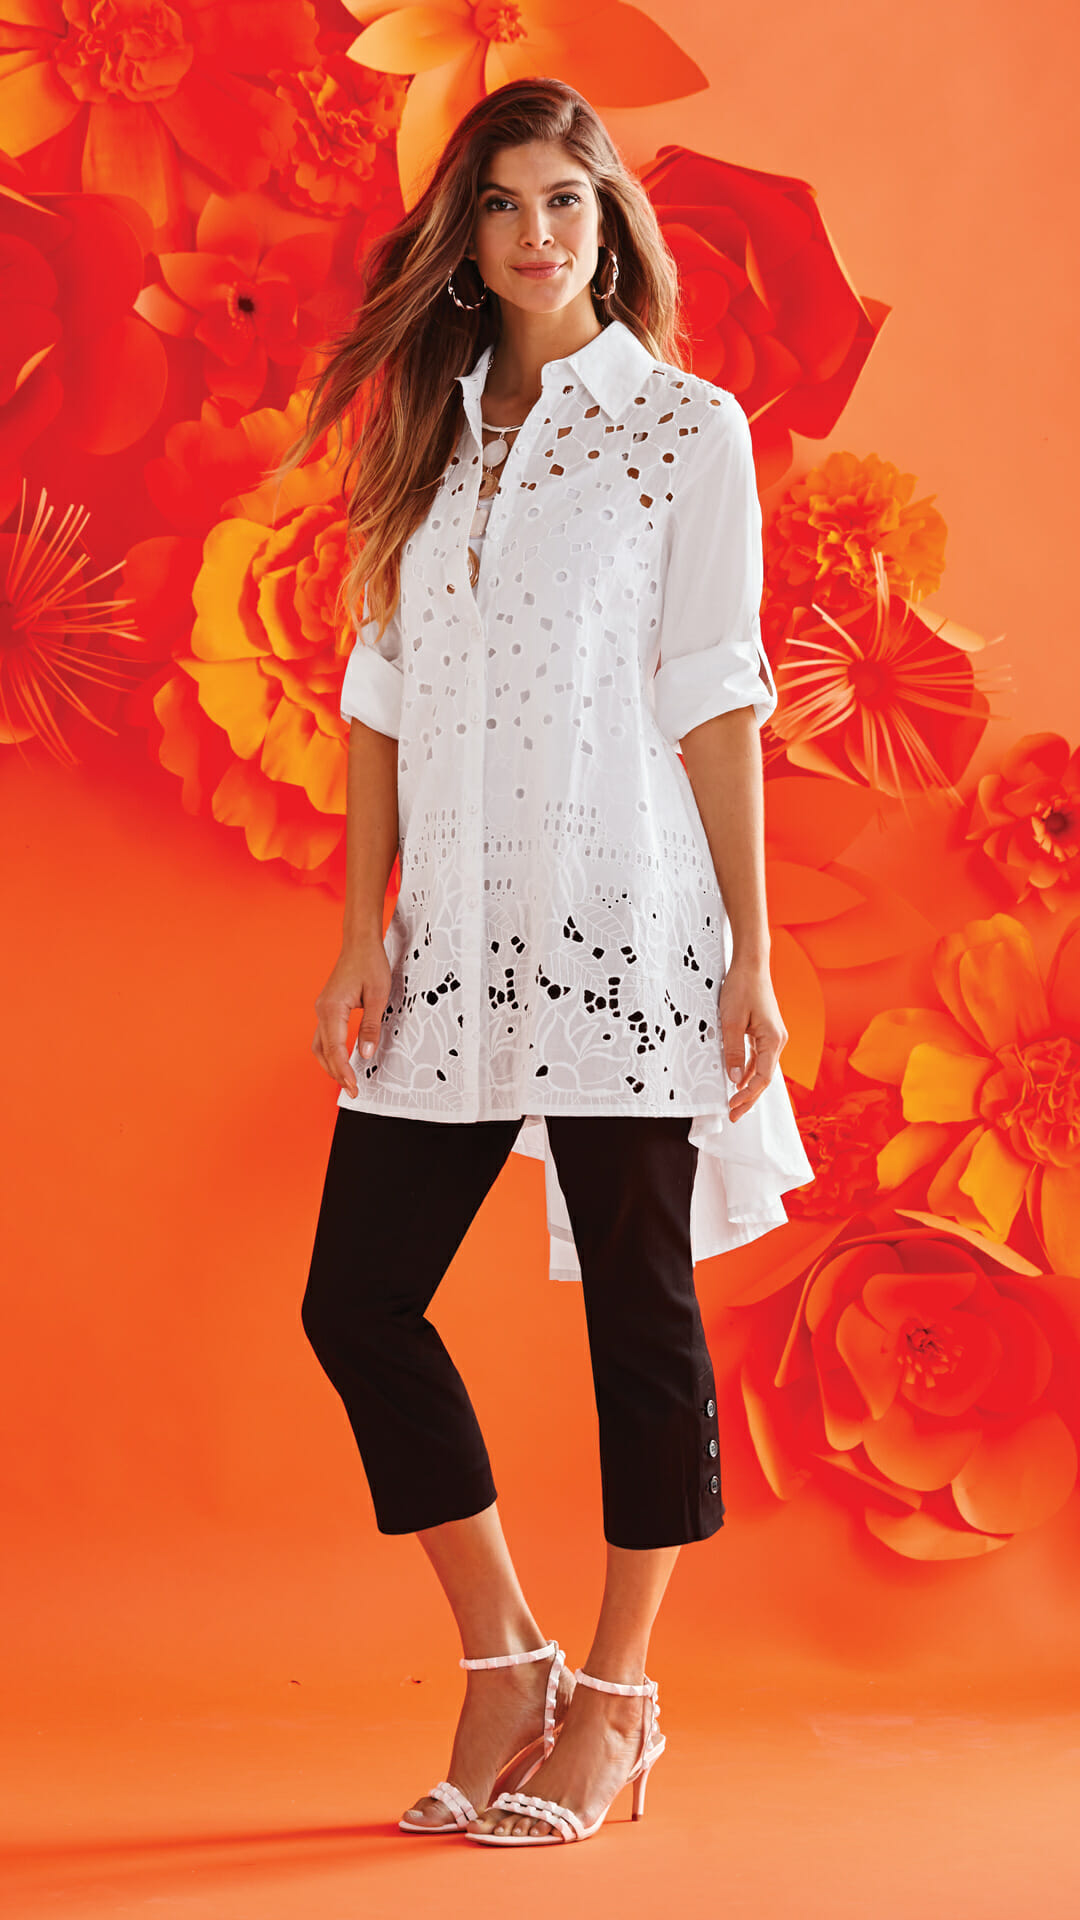 A woman in a white cutwork button-shirt tunic, black button capris, and white sandals, with an orange floral background.